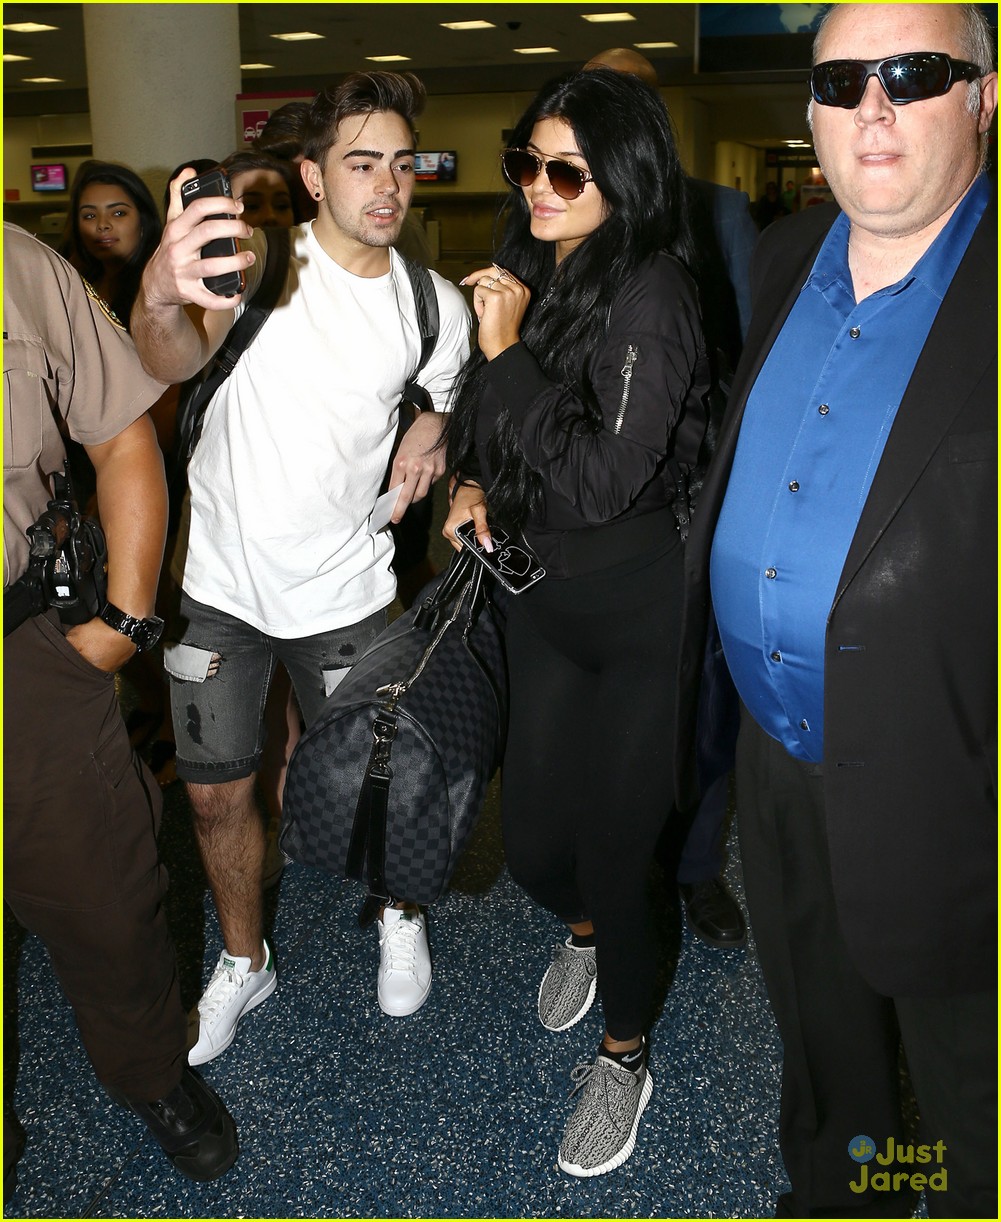 Kylie jenner arrives at miami international airport hi-res stock